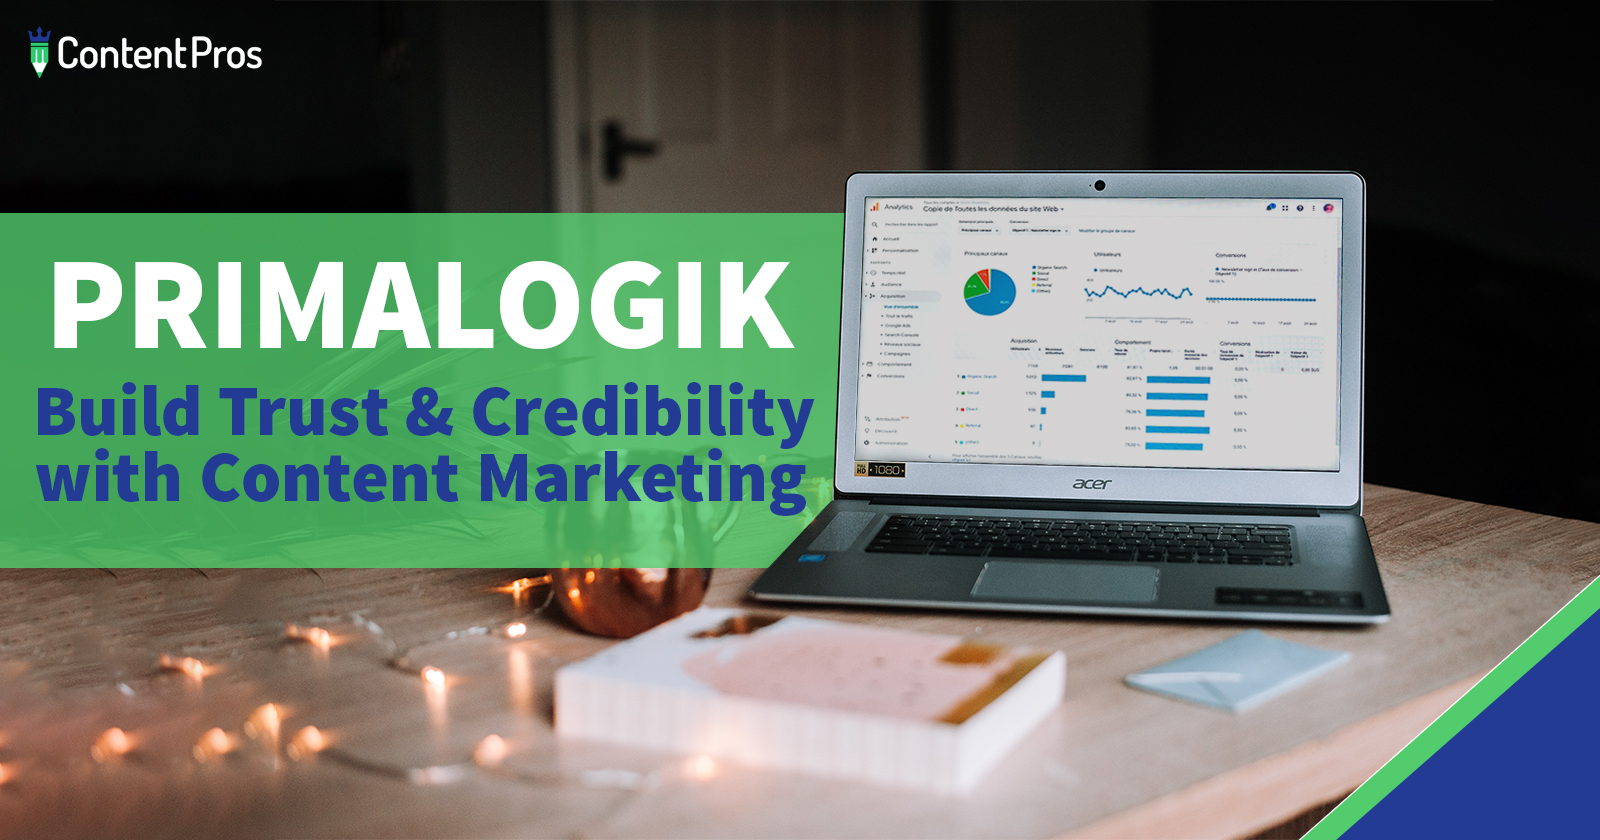 Primalogik case study - build trust and credibility with content marketing